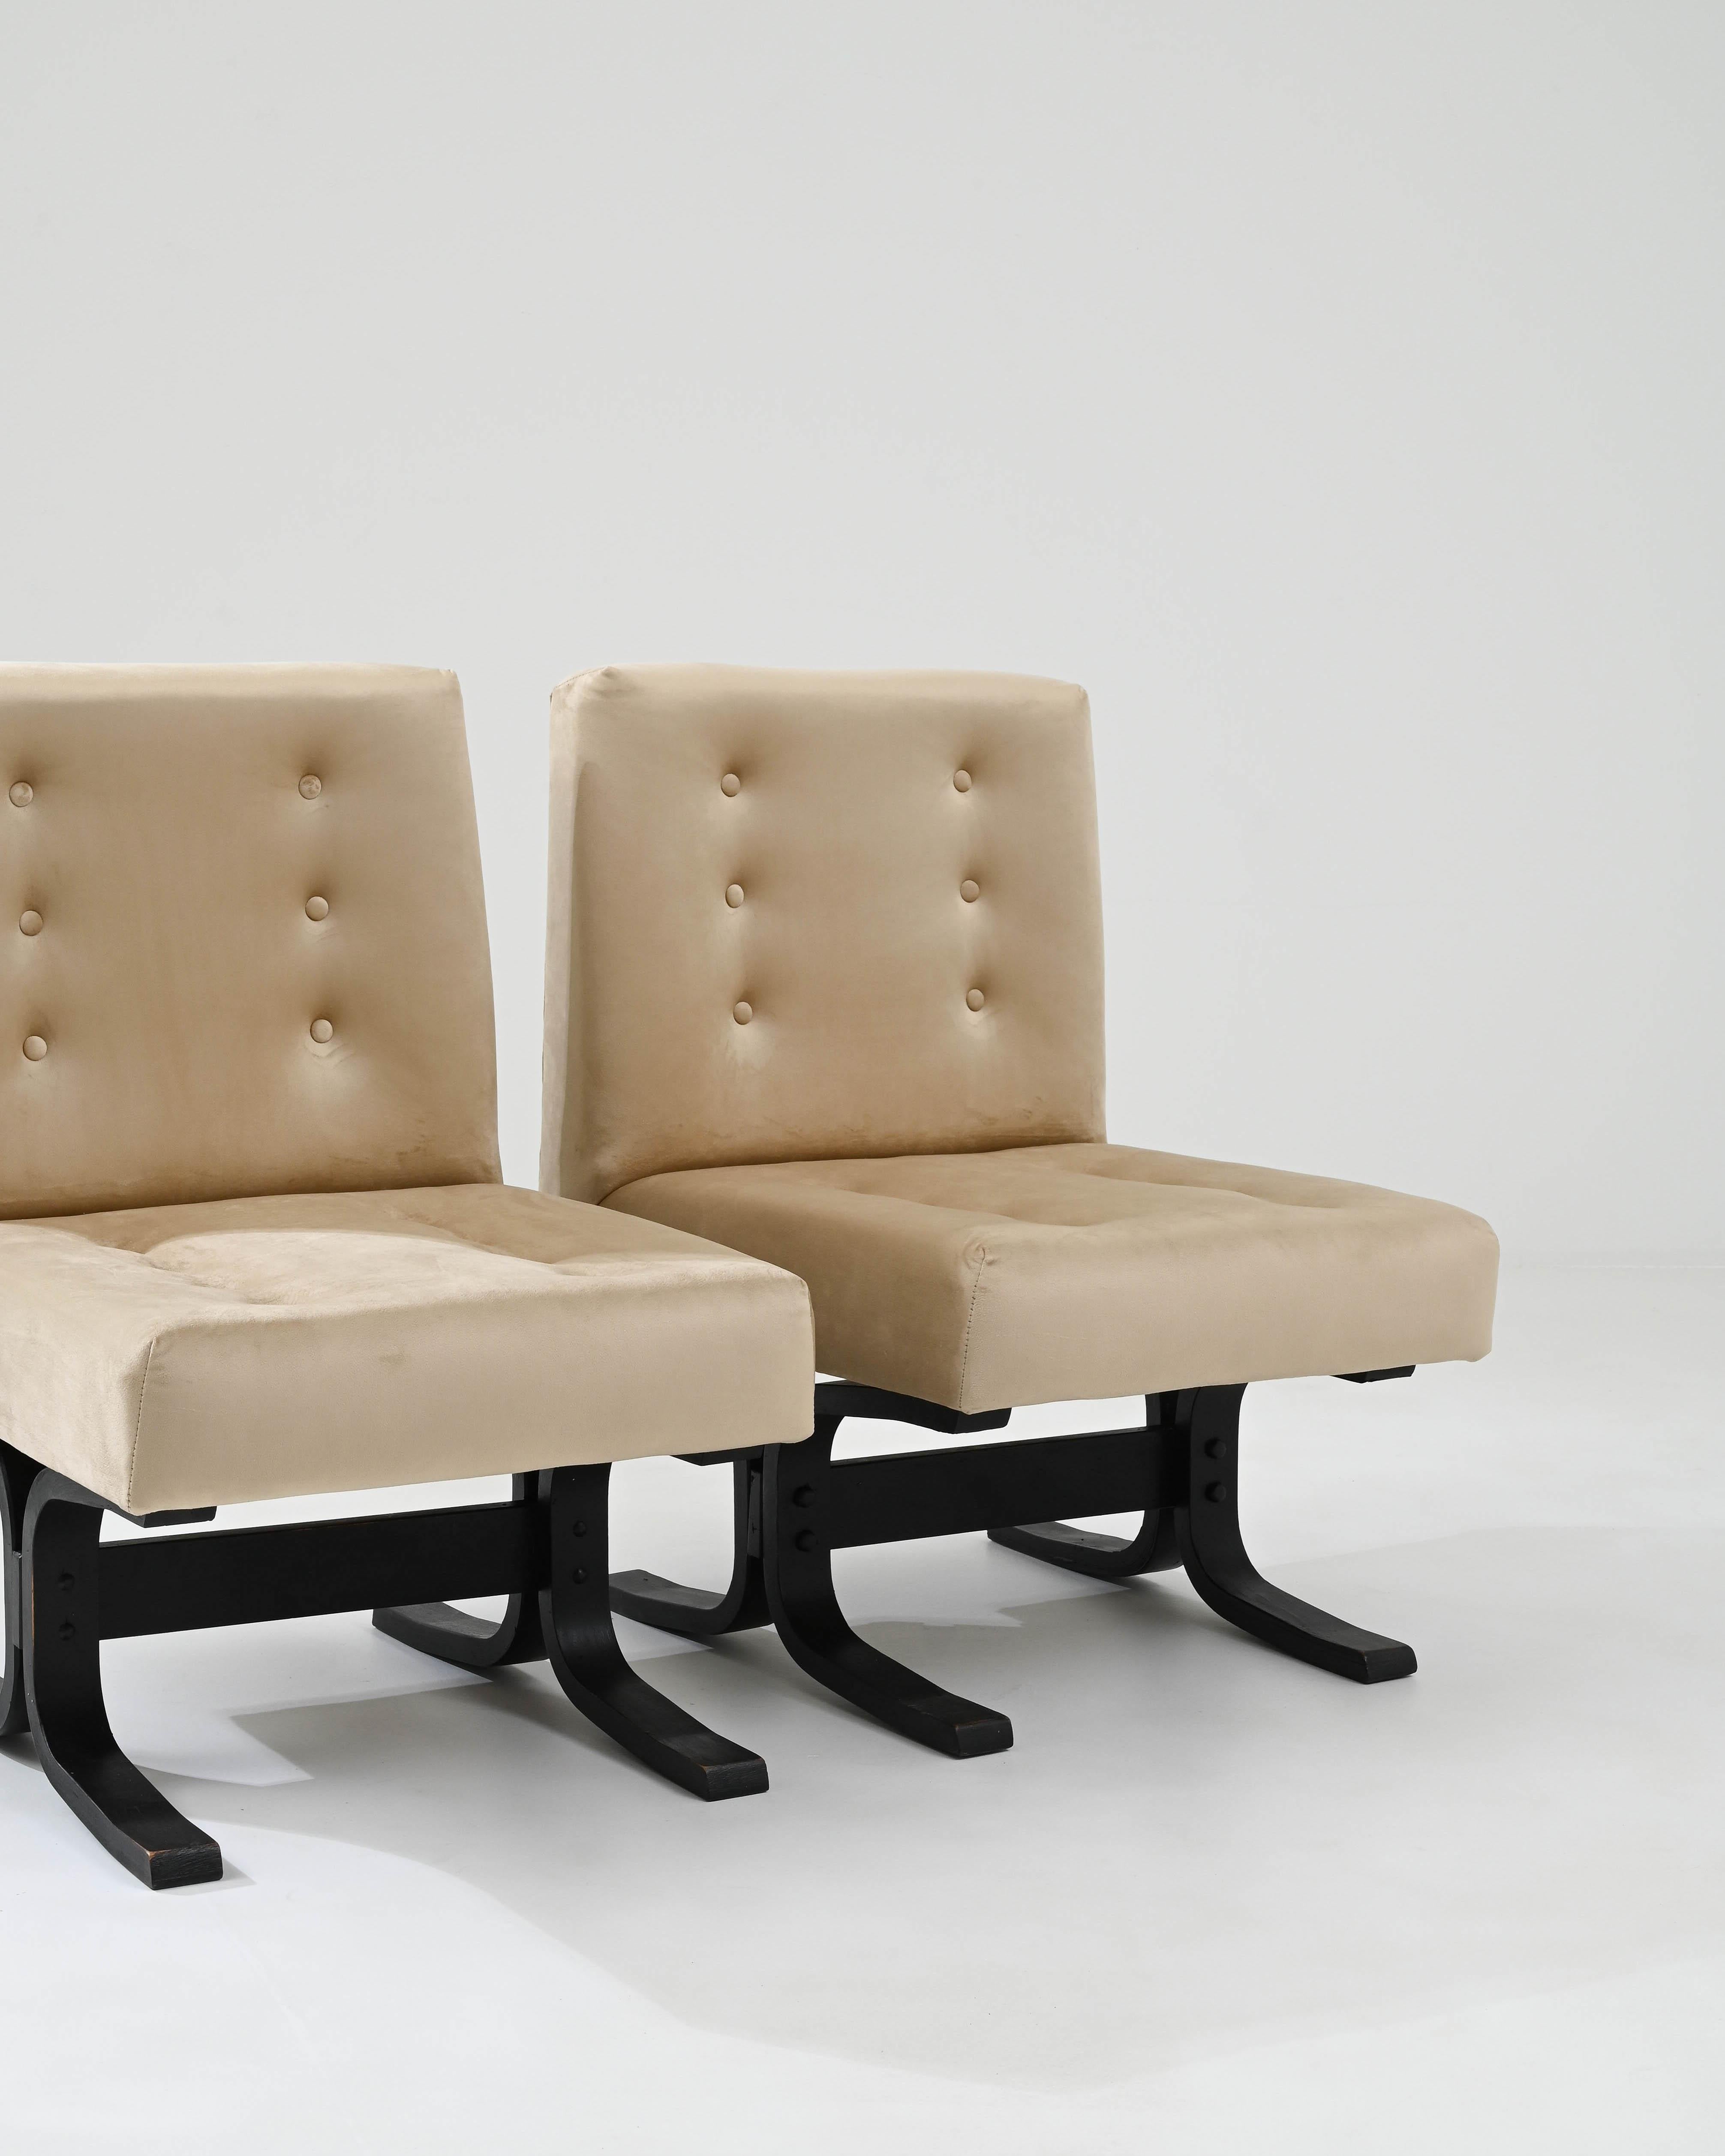 1960s Czech Upholstered Chairs by Ludvik Volak, a Pair For Sale 3